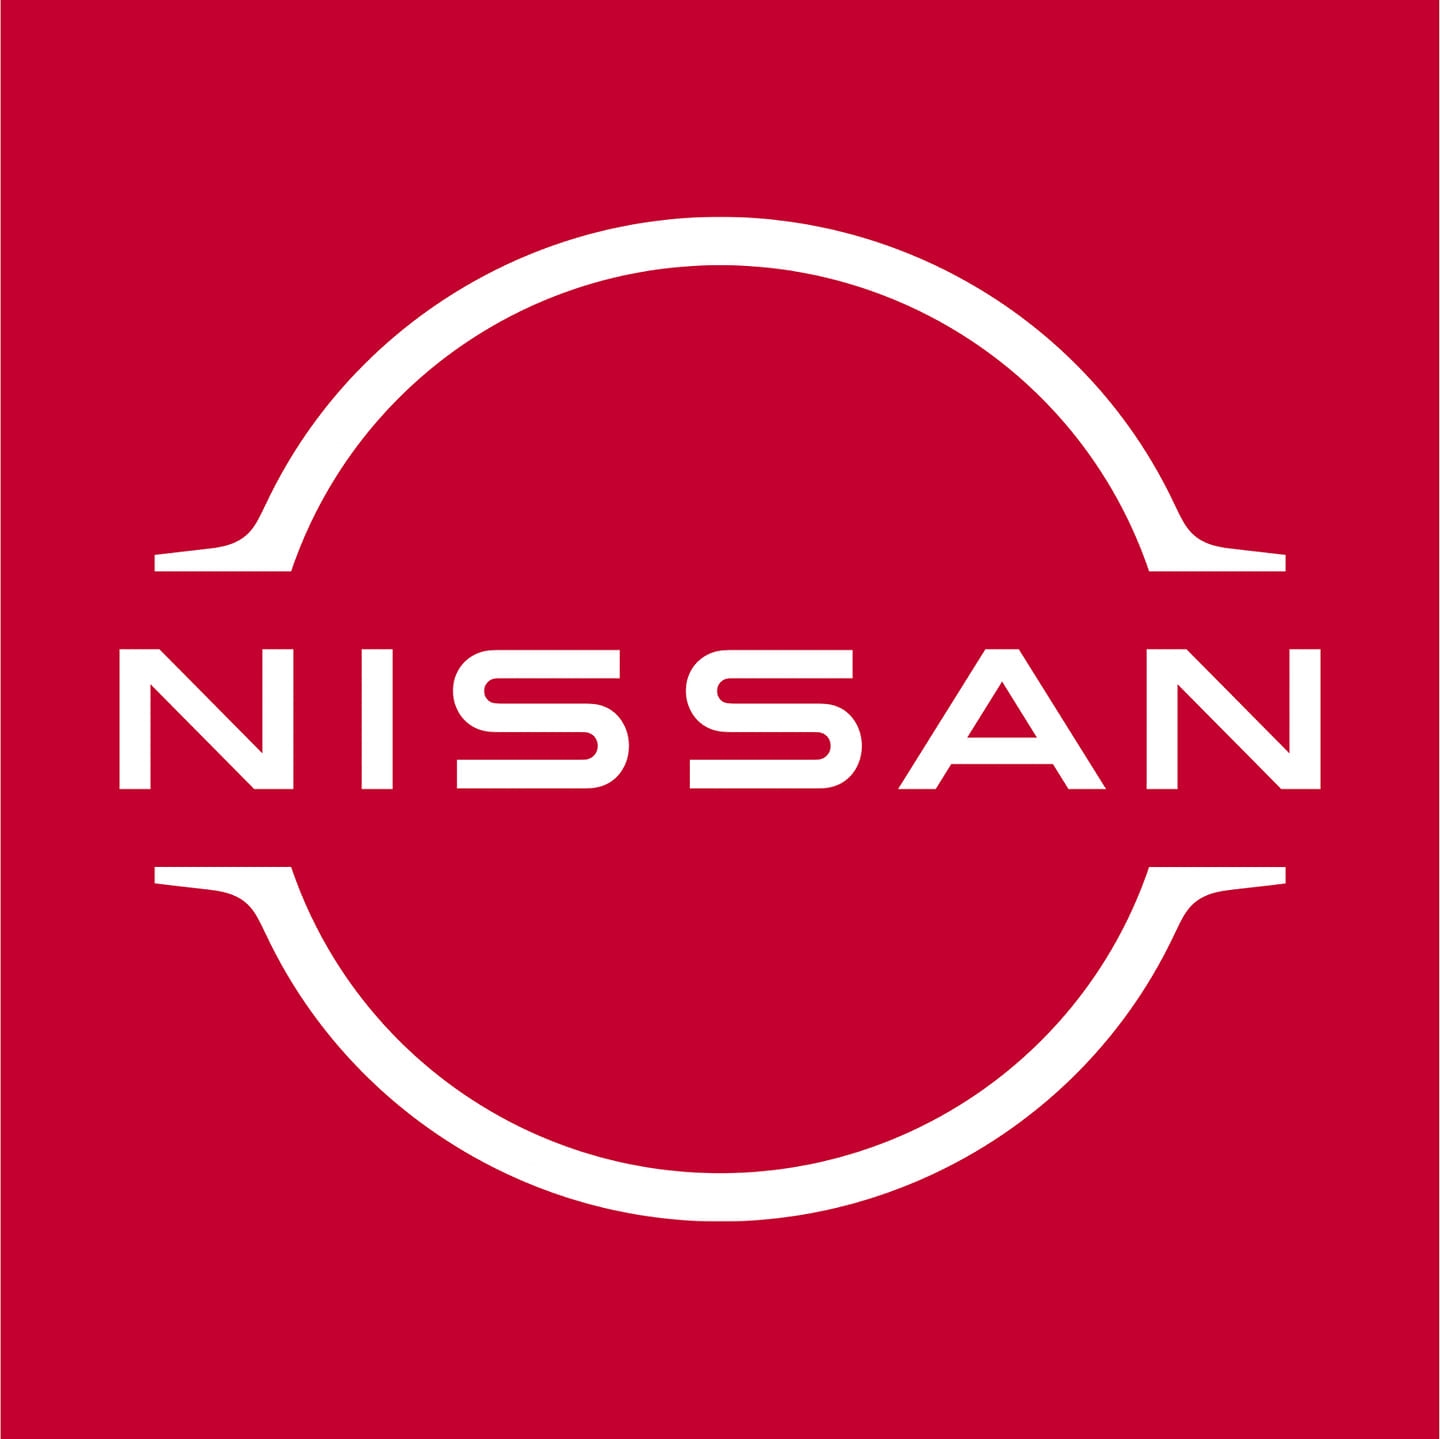 ANAND NISSAN INDORE|Show Room|Automotive